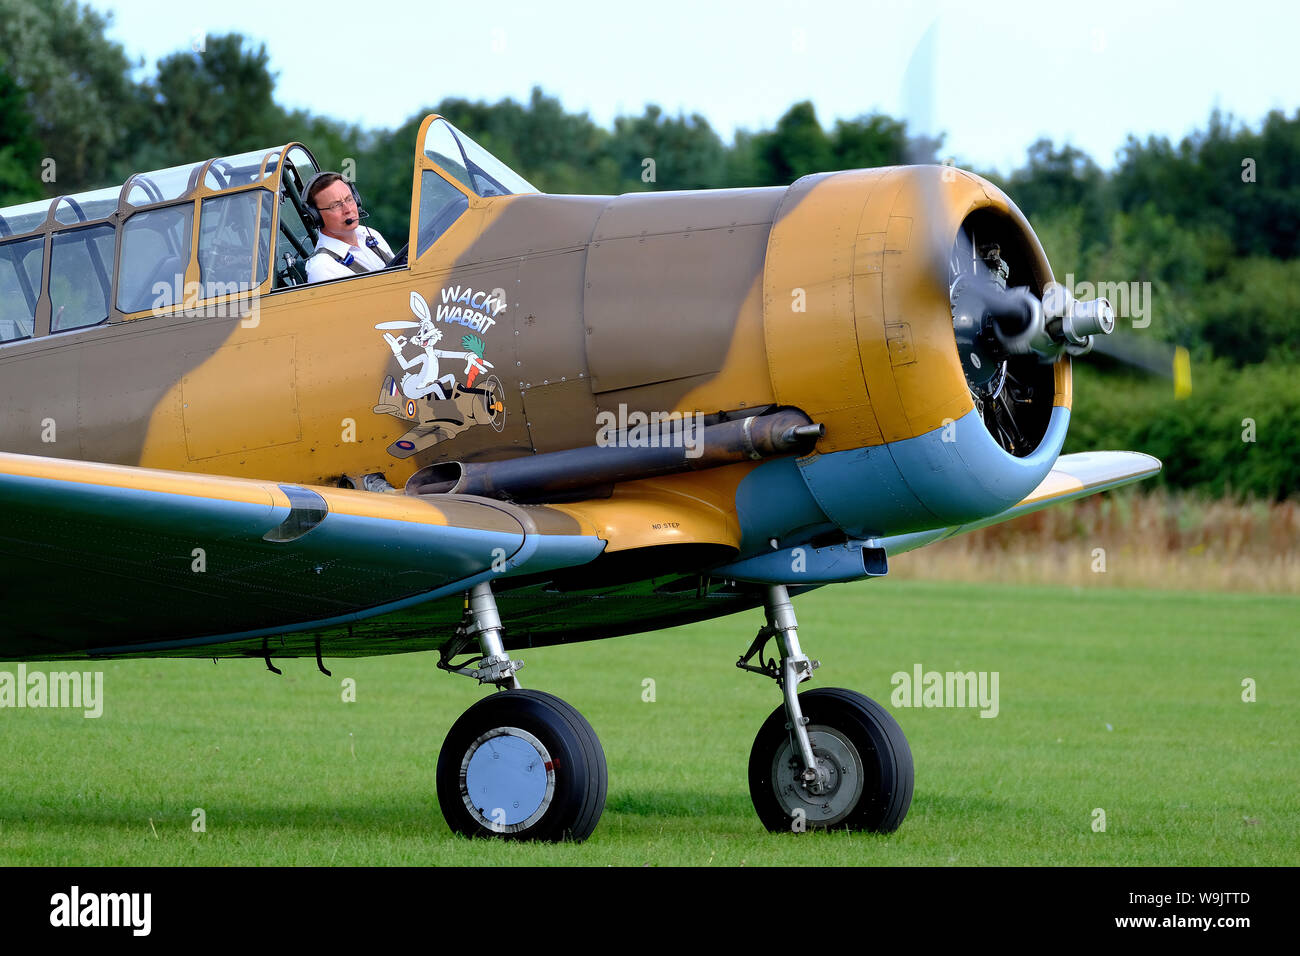 North American Harvard second world war advanced pilot training aircraft. Also known as the Texan. Stock Photo